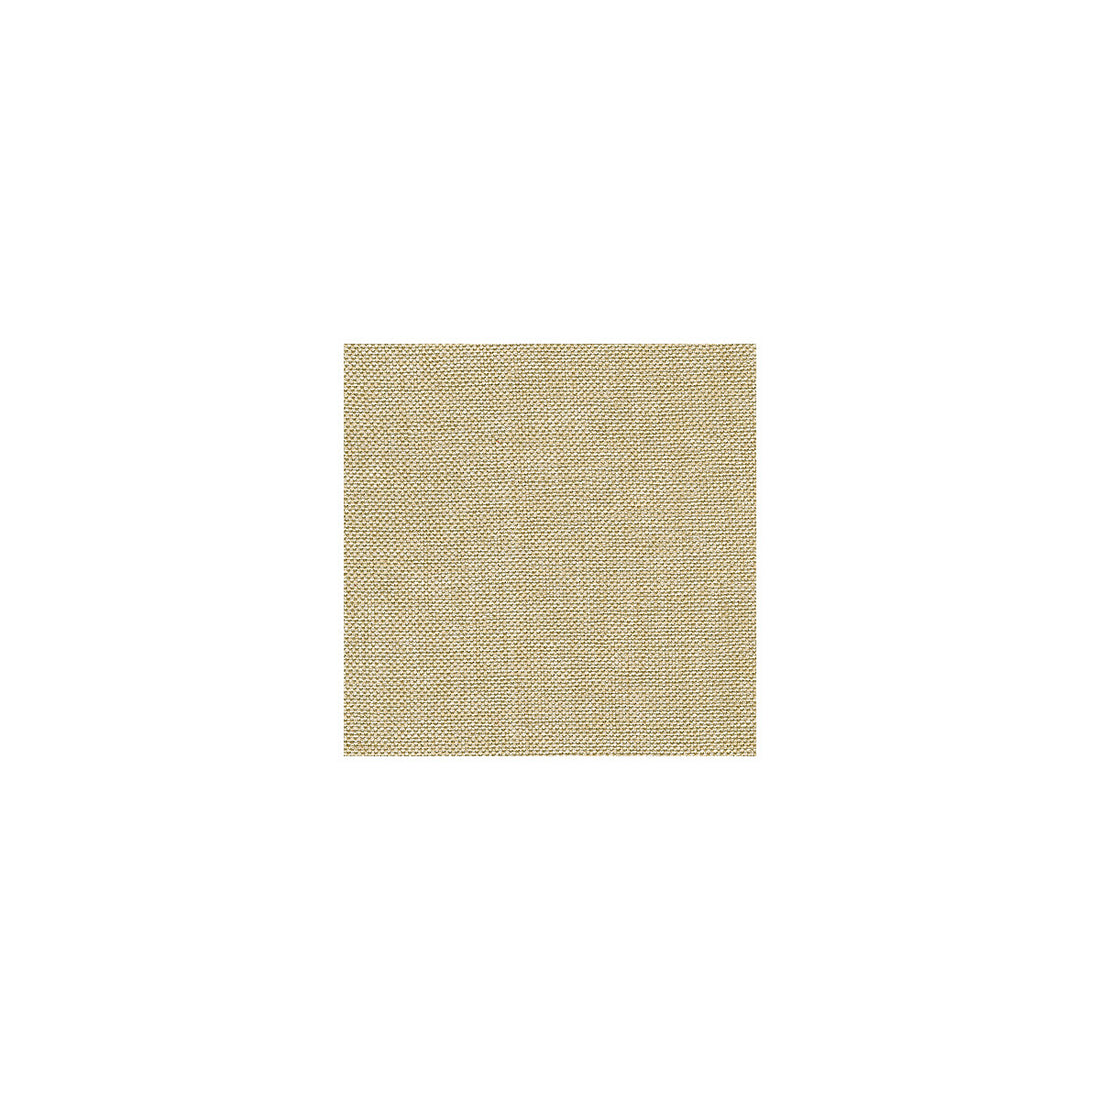 Saxon fabric in sandstone color - pattern 32501.116.0 - by Kravet Contract in the Perfect Plains collection